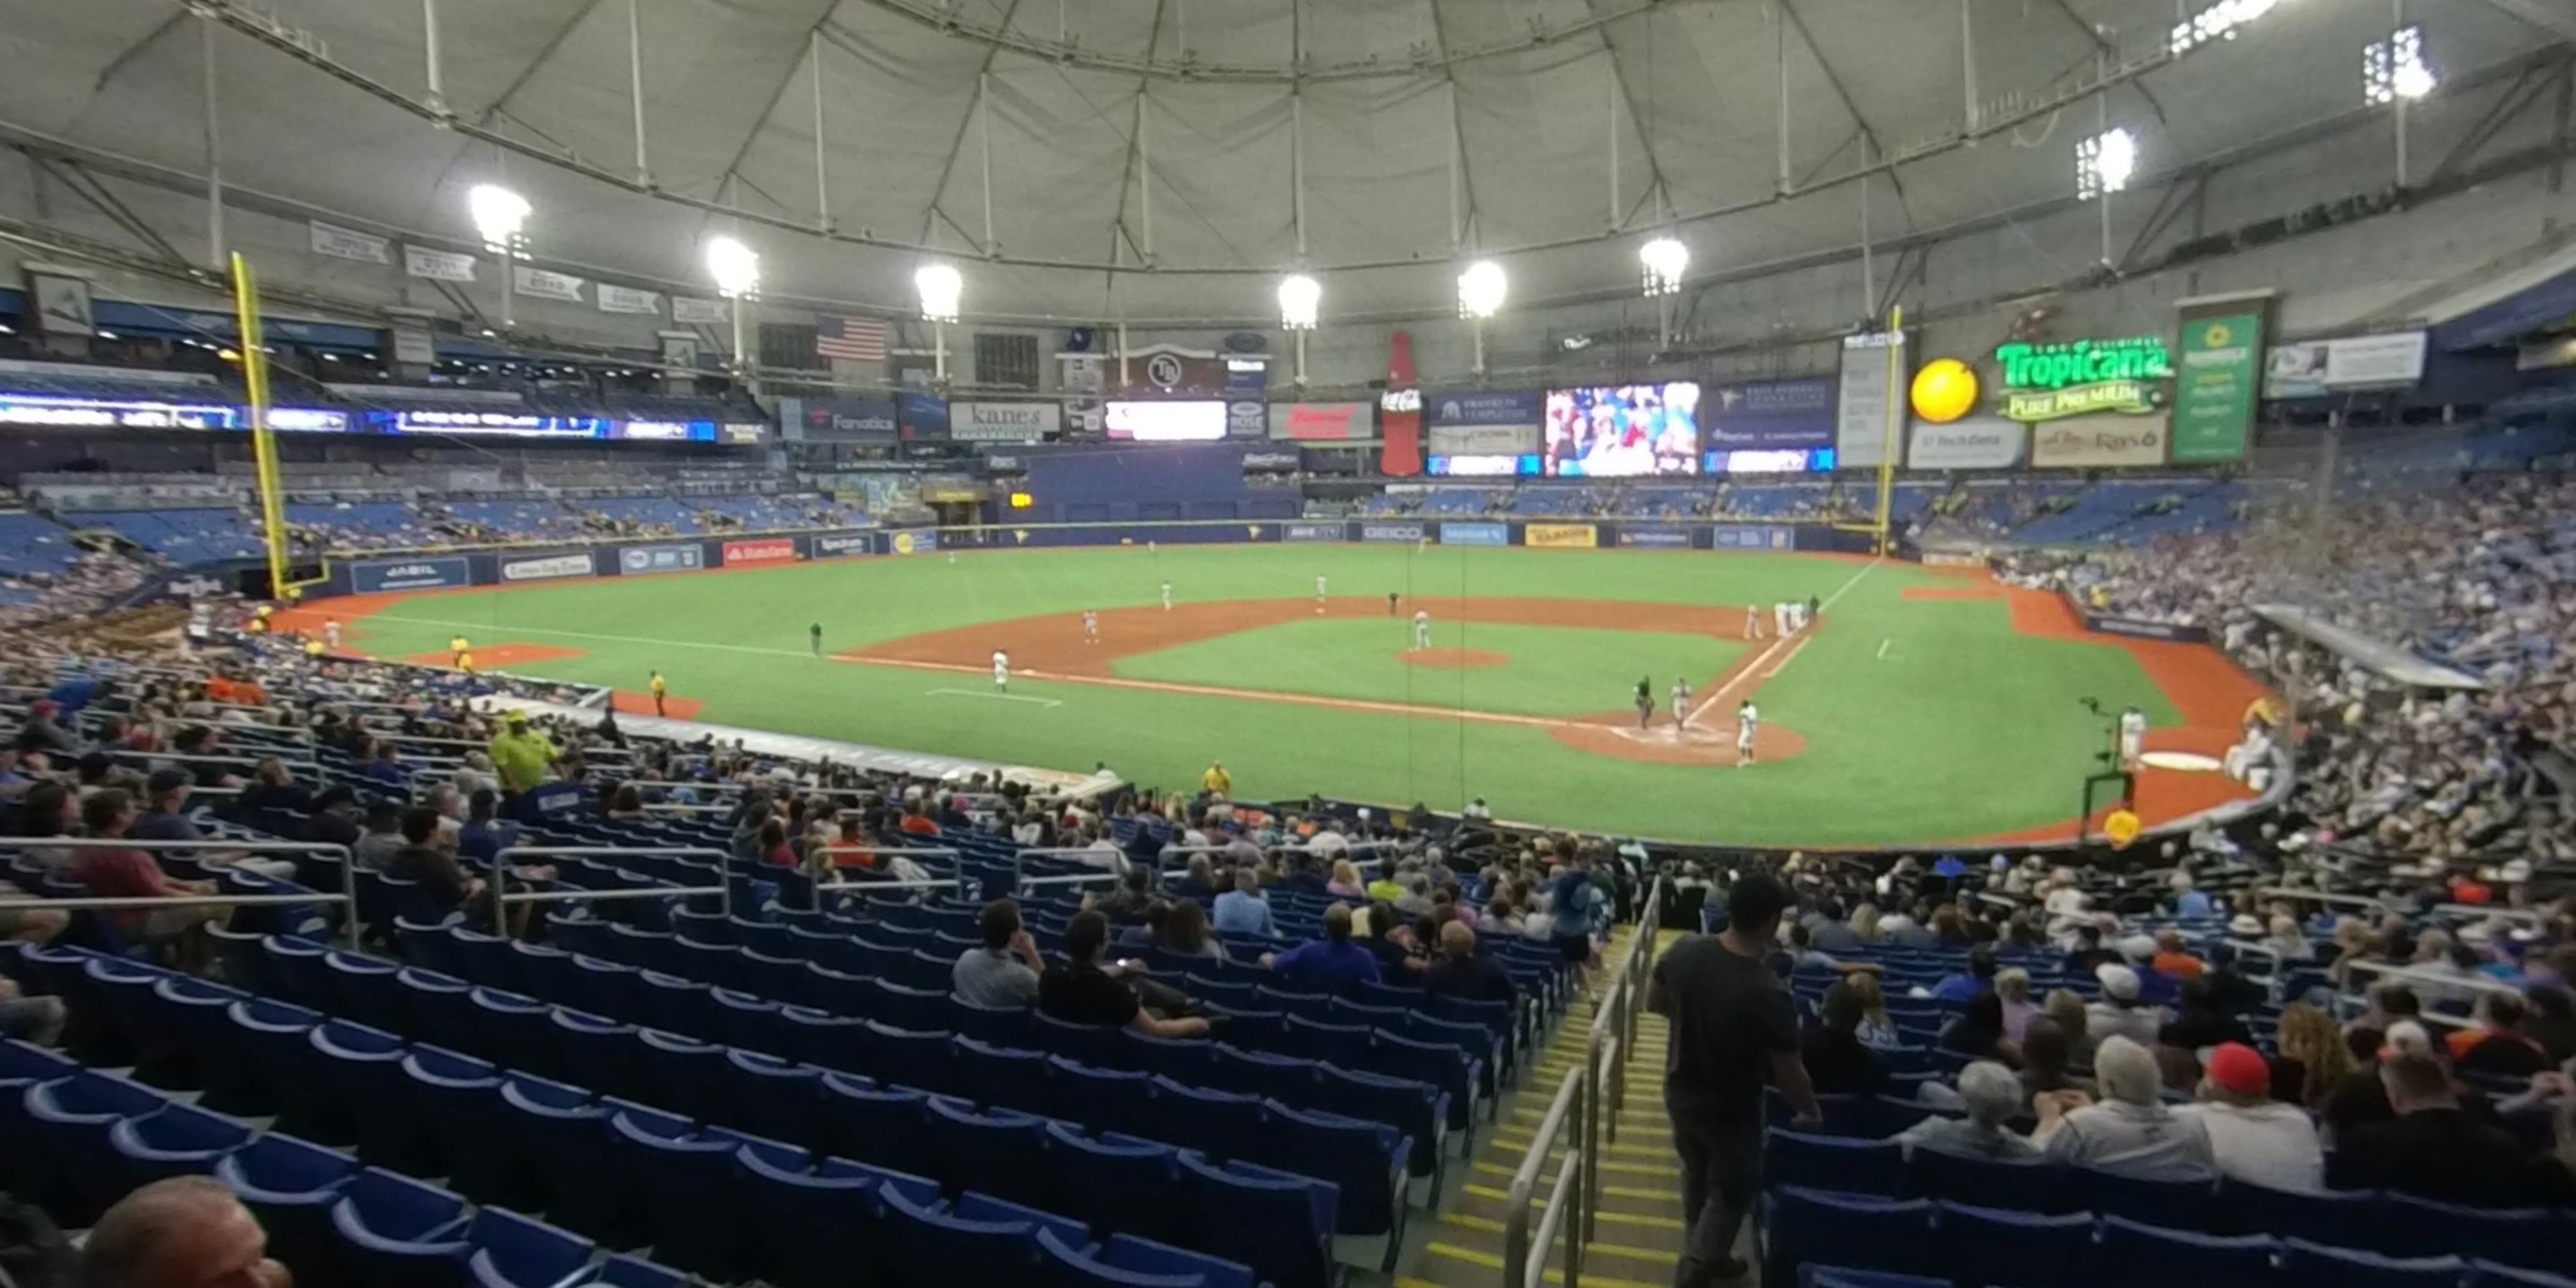 section 105 panoramic seat view  for baseball - tropicana field